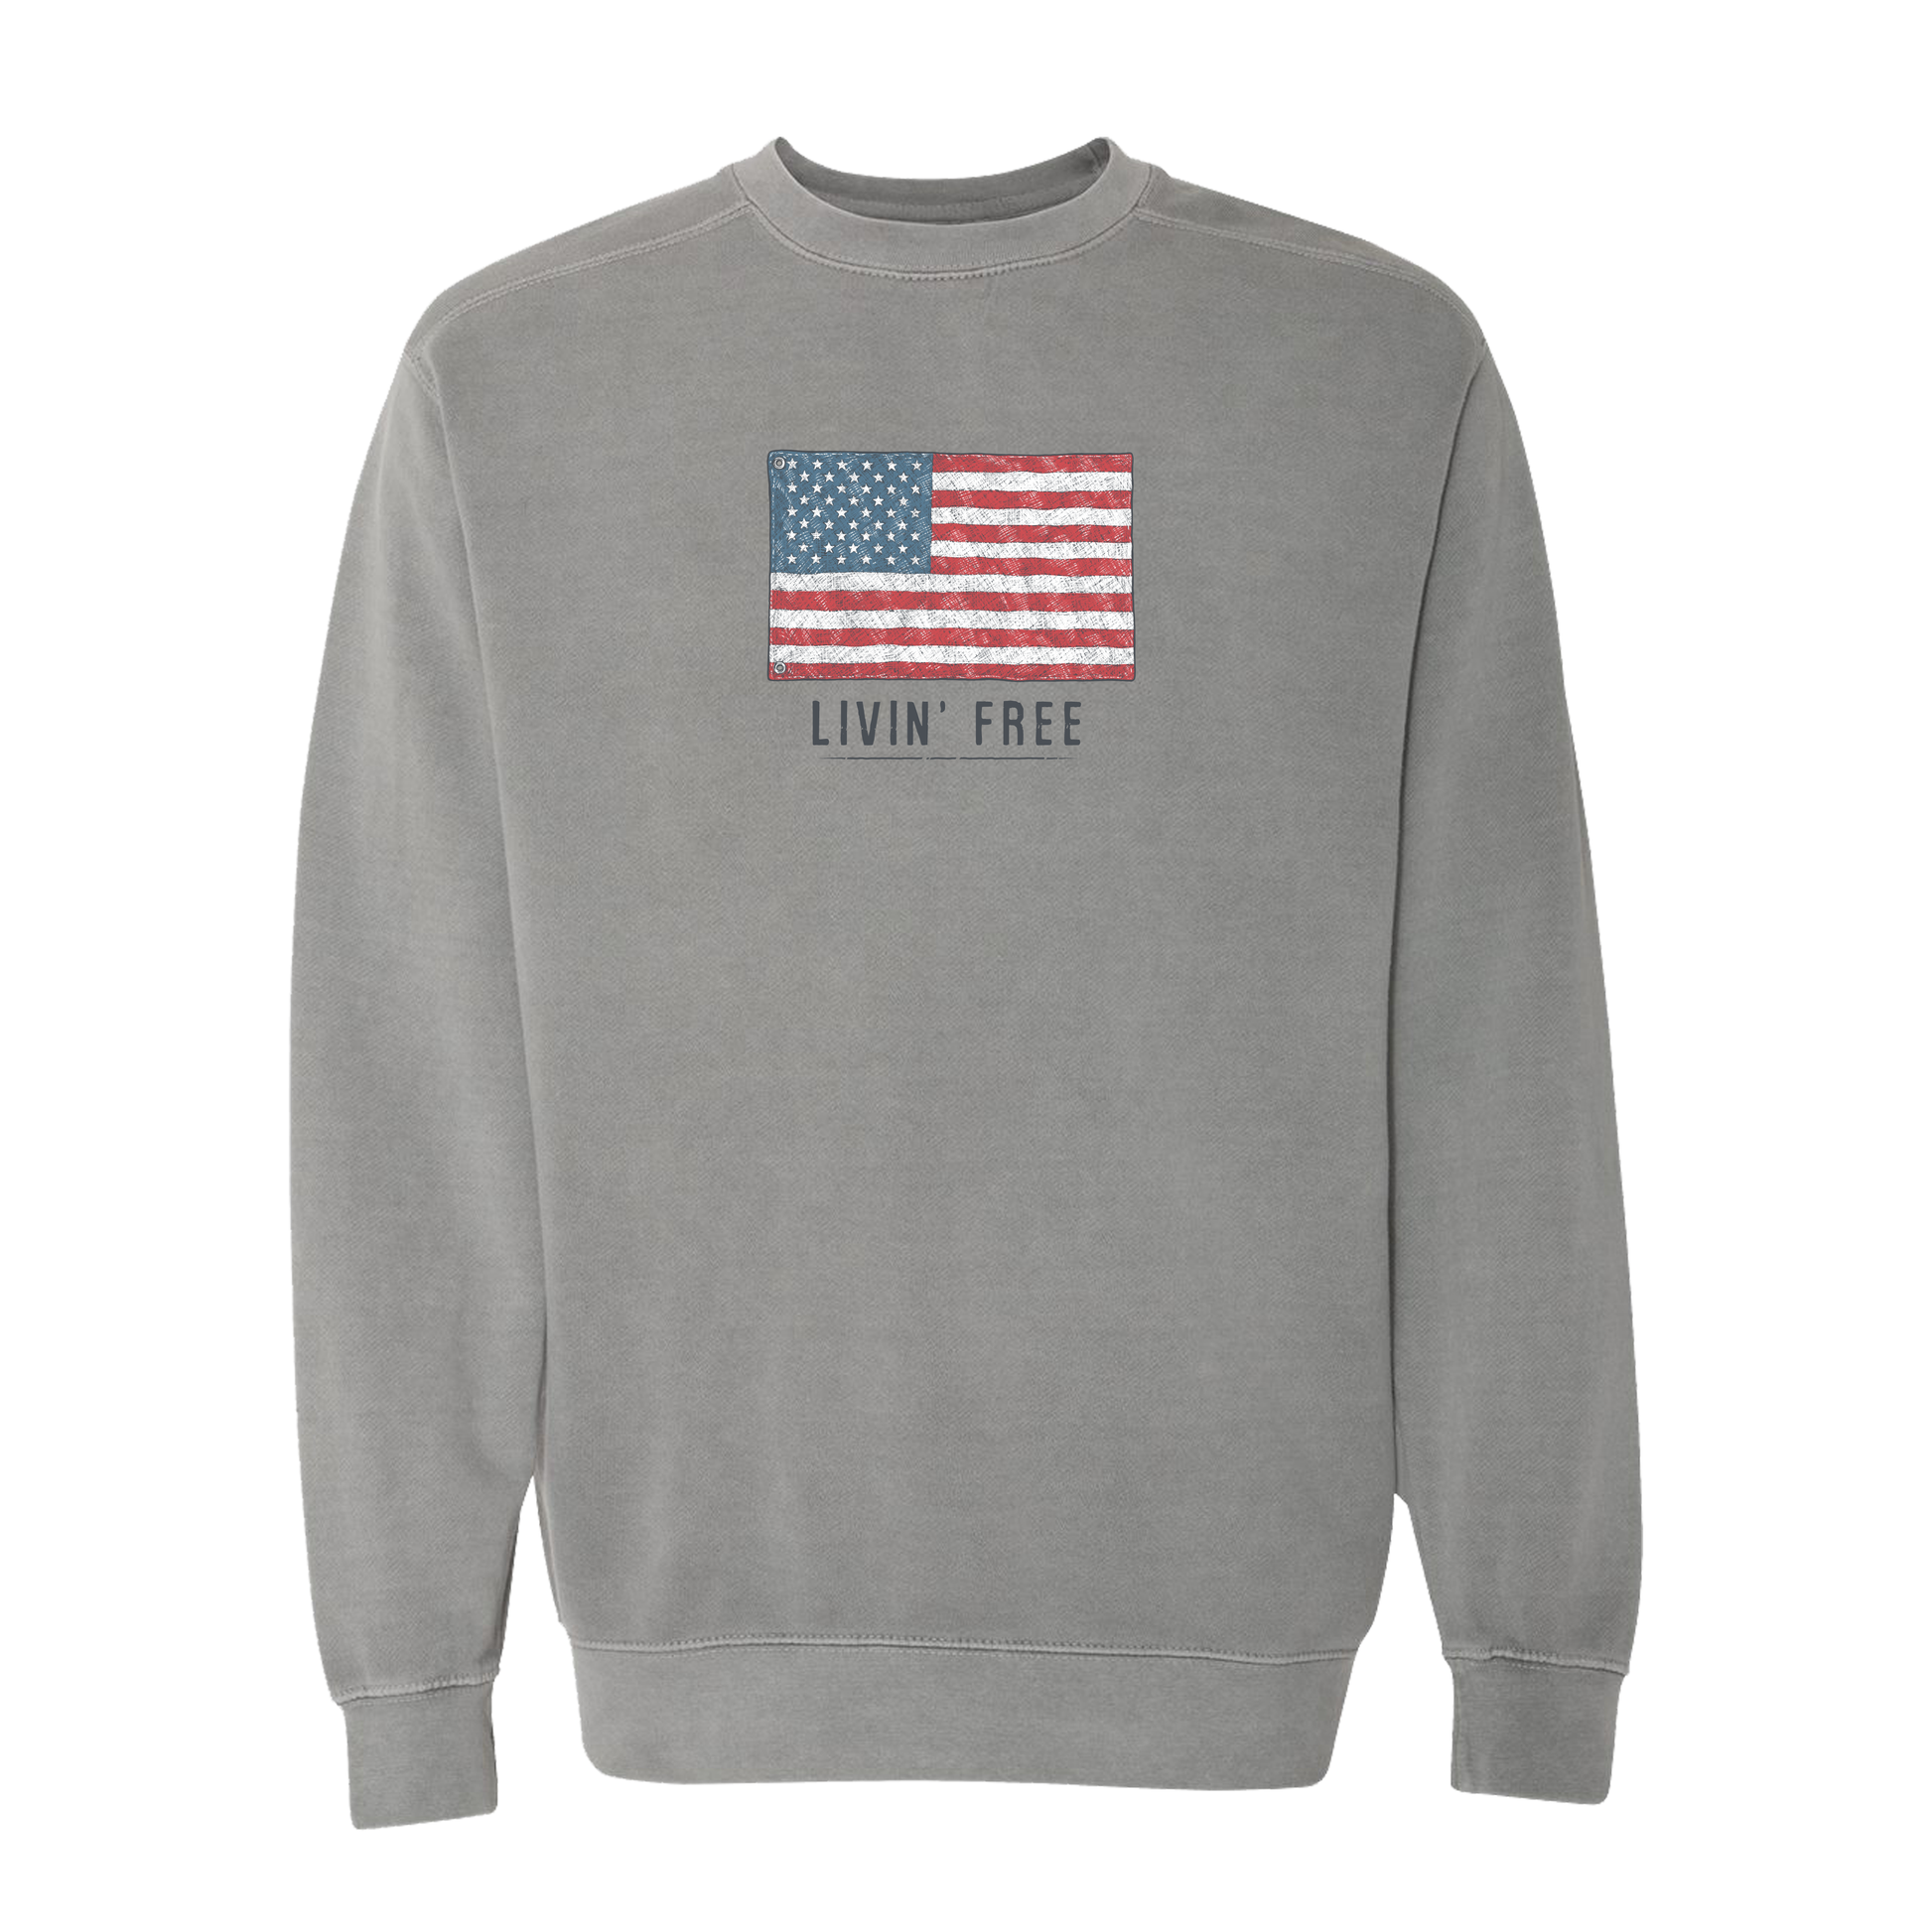 Livin' Free in the USA - Grey – Southern Fried Cotton